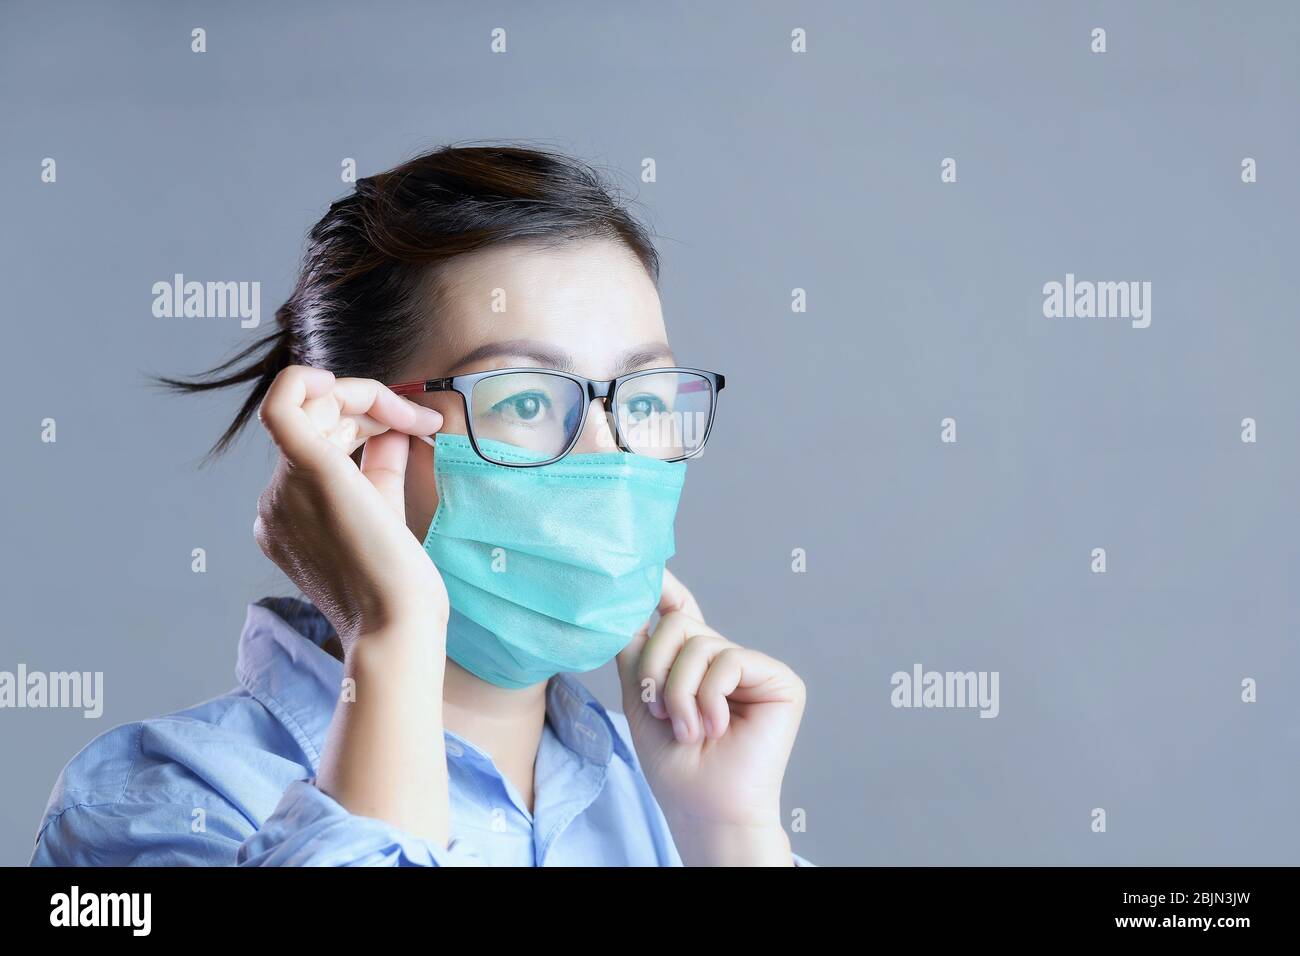 Portrait of a woman wearing a face mask Stock Photo